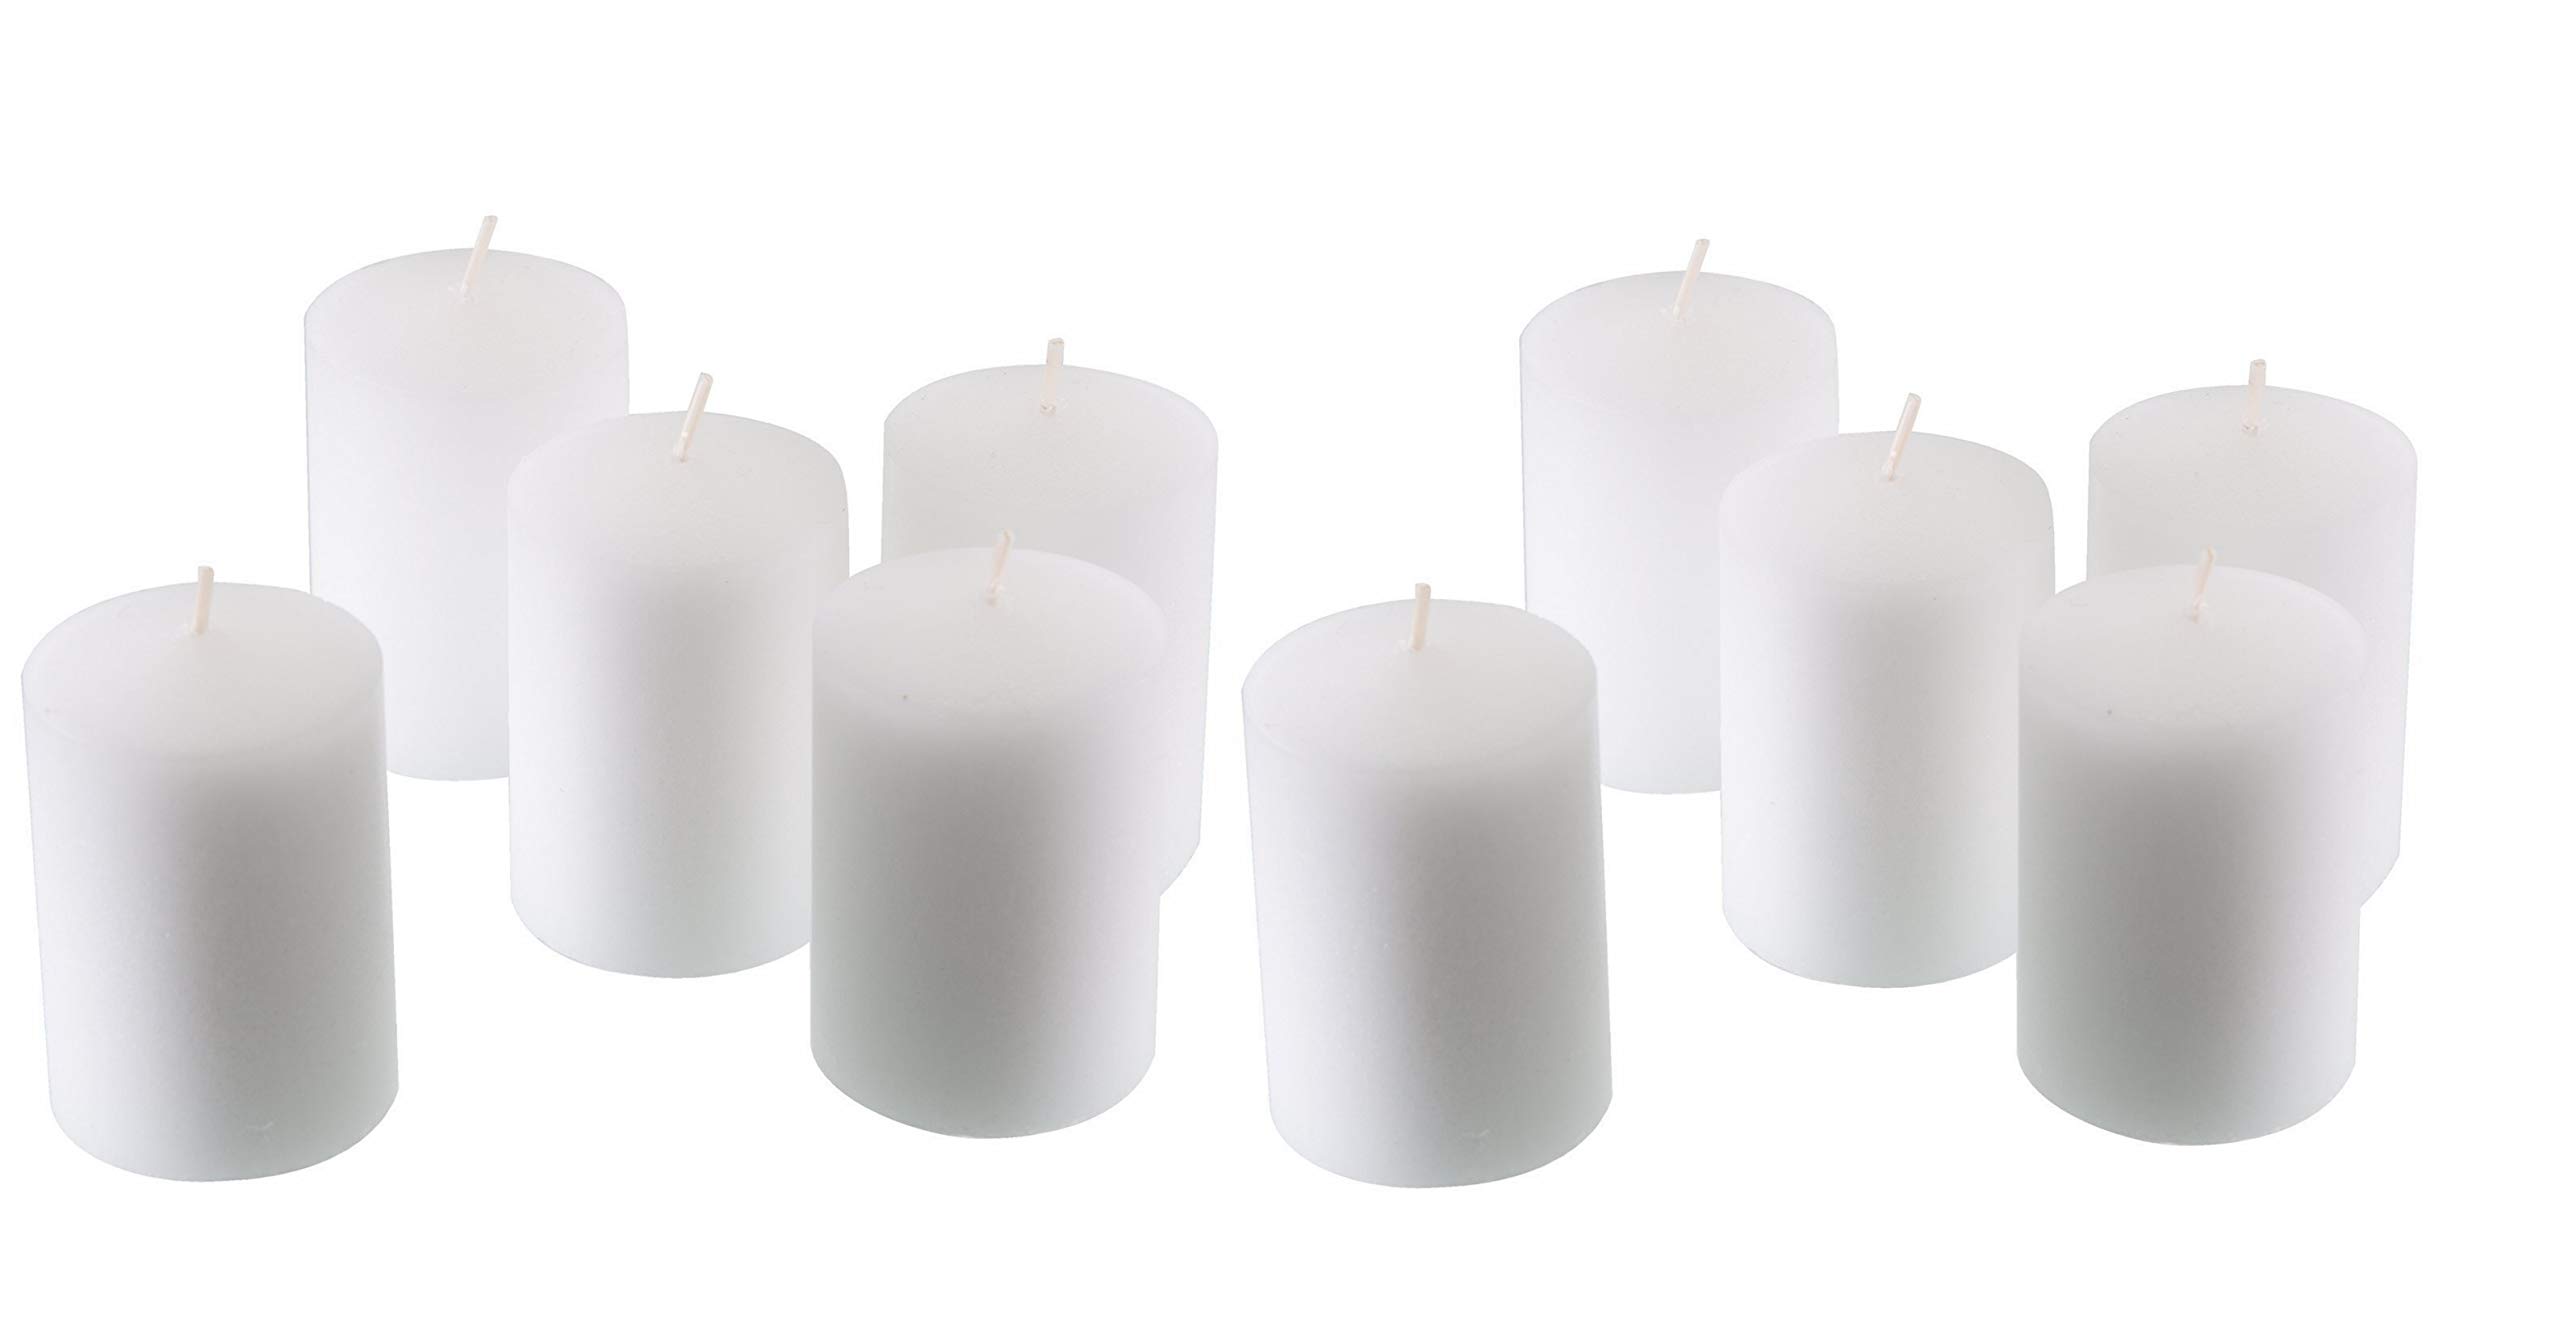 D'light Online Dlight Online 15 Hour Unscented White Emergency And Events Bulk Votive candles For Wedding Votives, Luminary candles, Restaurant